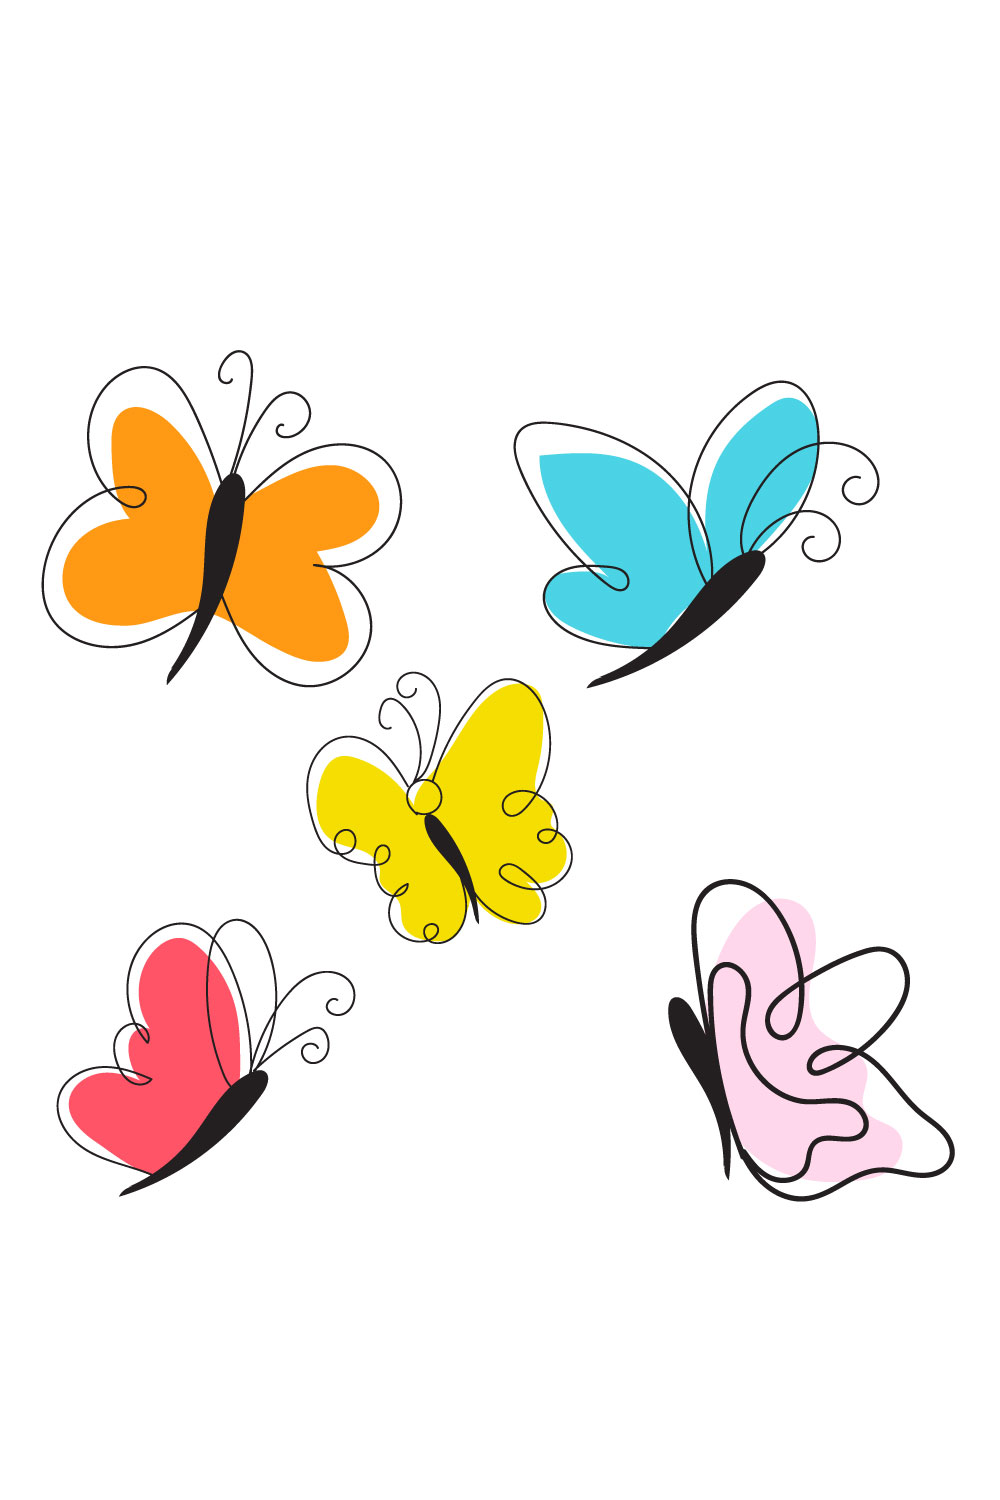 Four colorful butterflies flying in the air.